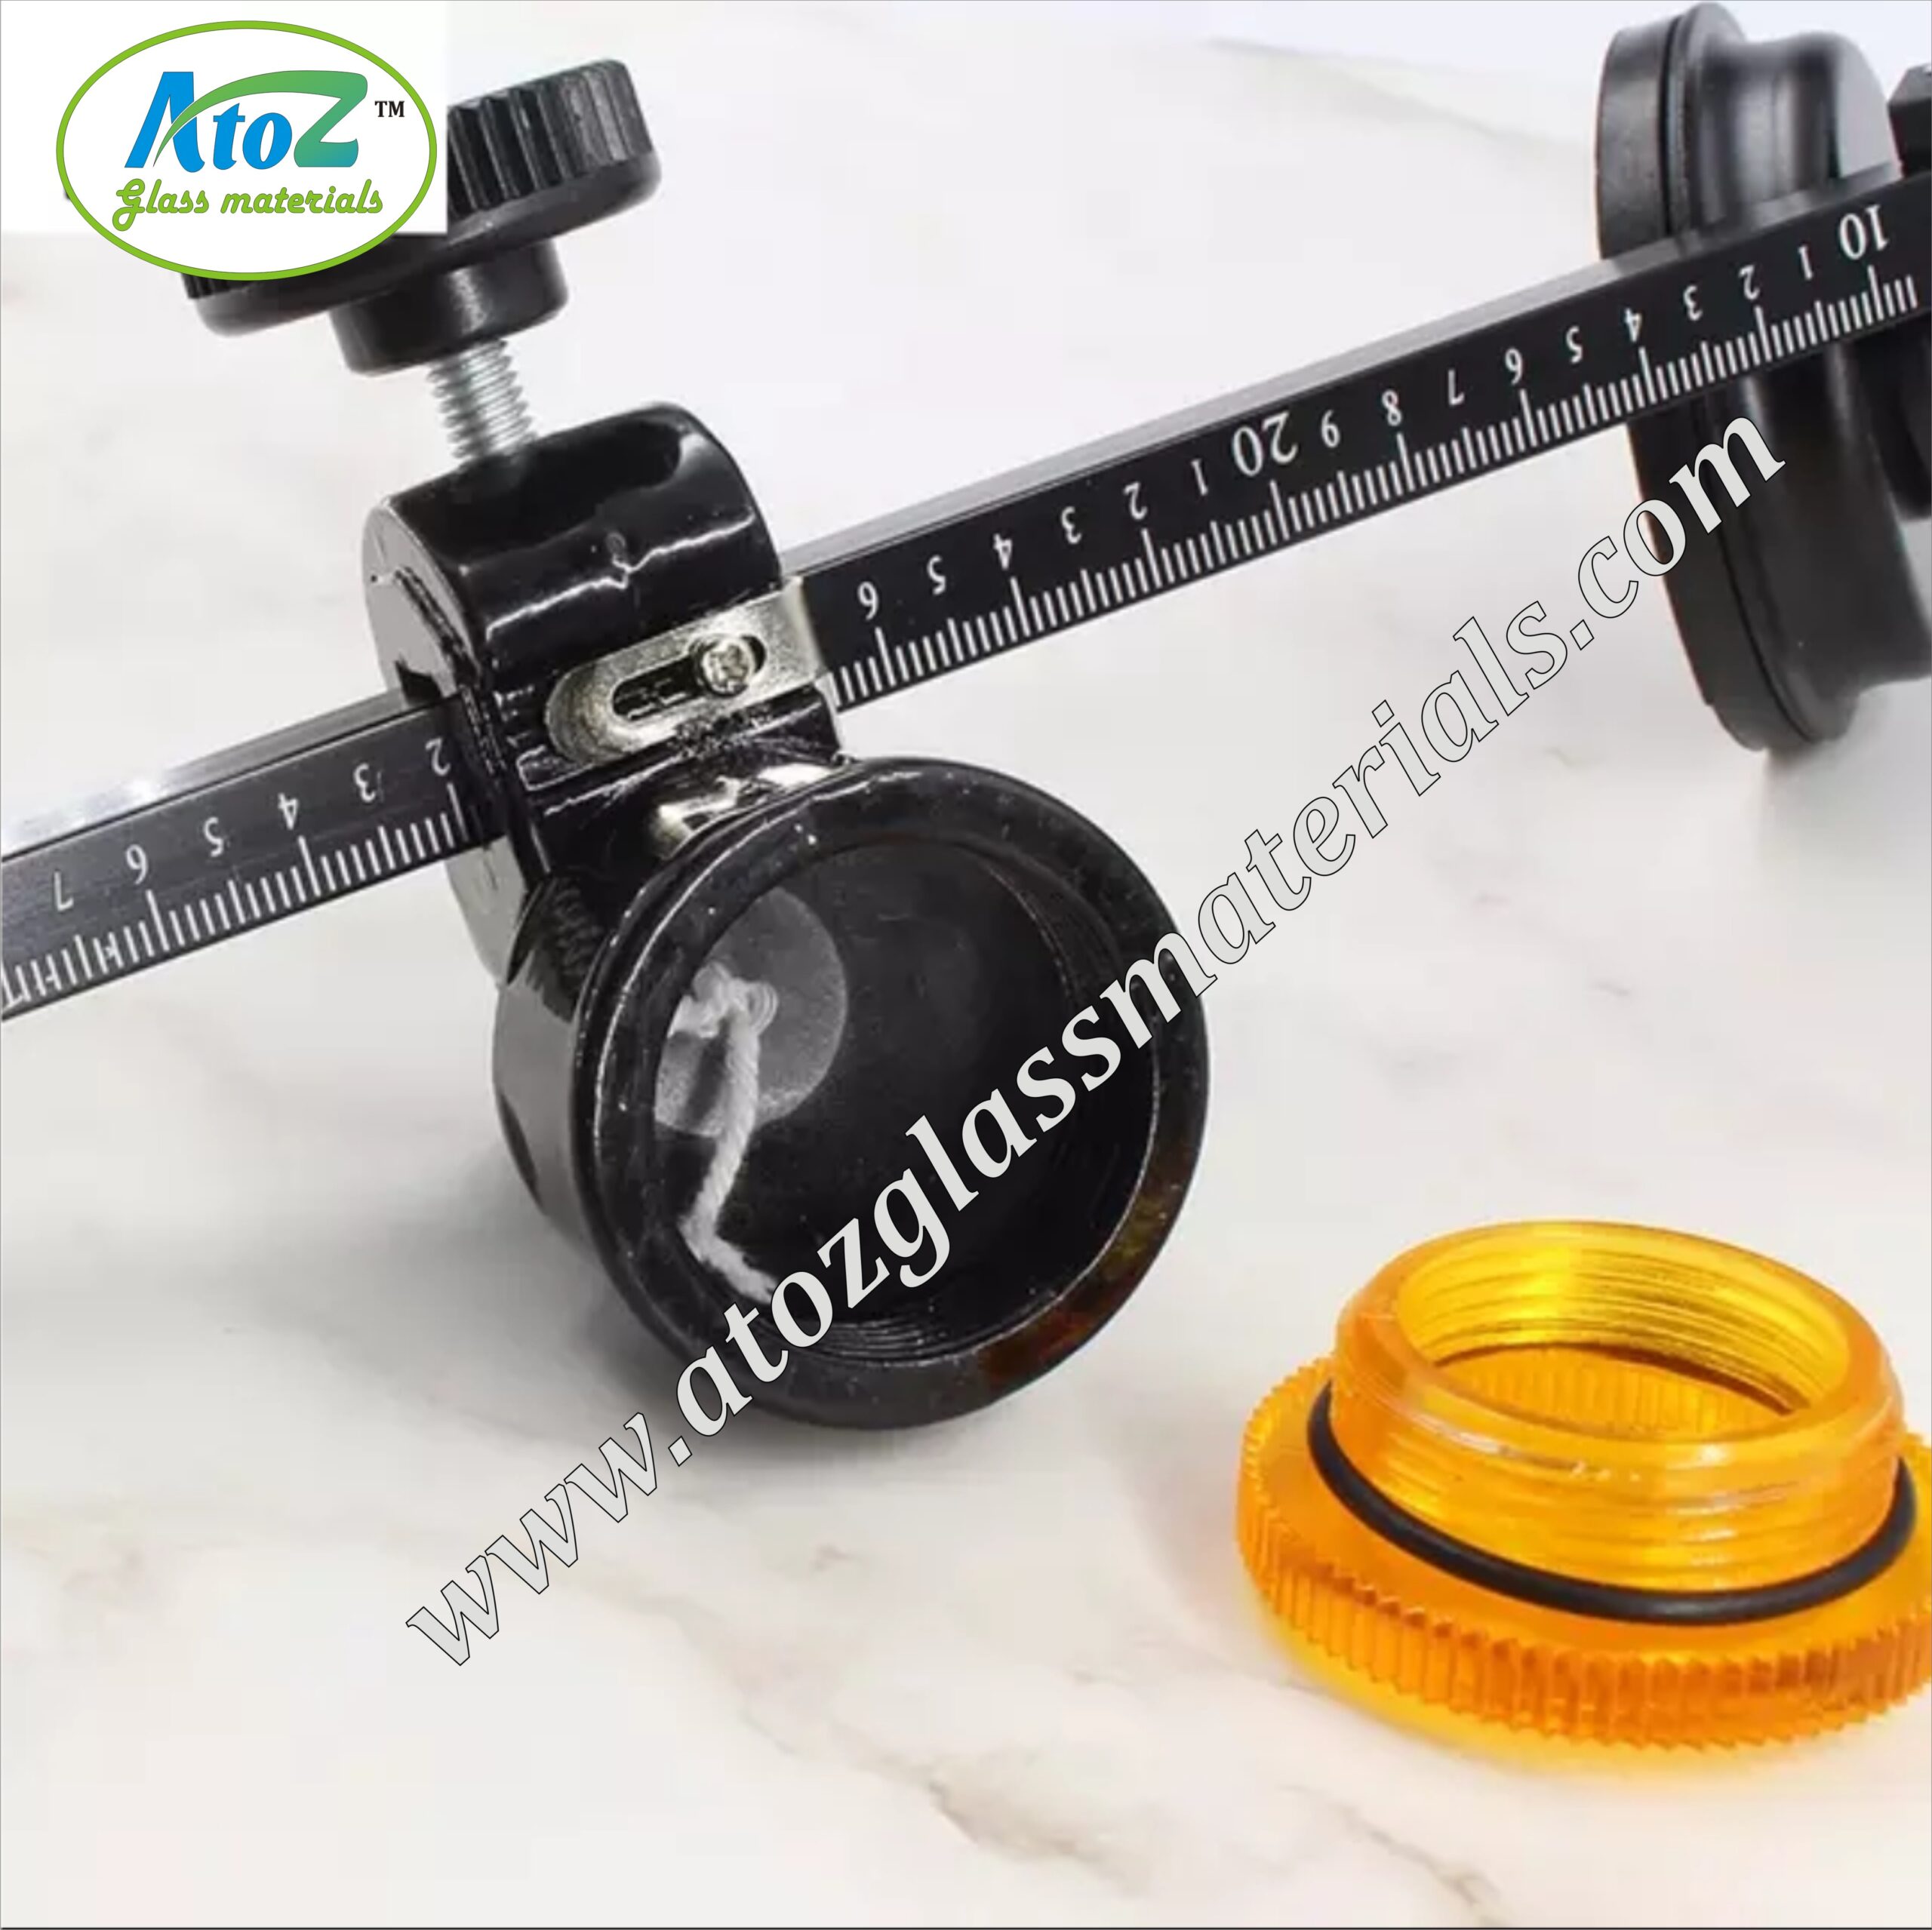 LDEXIN 7.87 (20cm) Circular Glass Cutter with Suction Cup, Adjustable  Compasses Type Glass Circle Cutting Tool